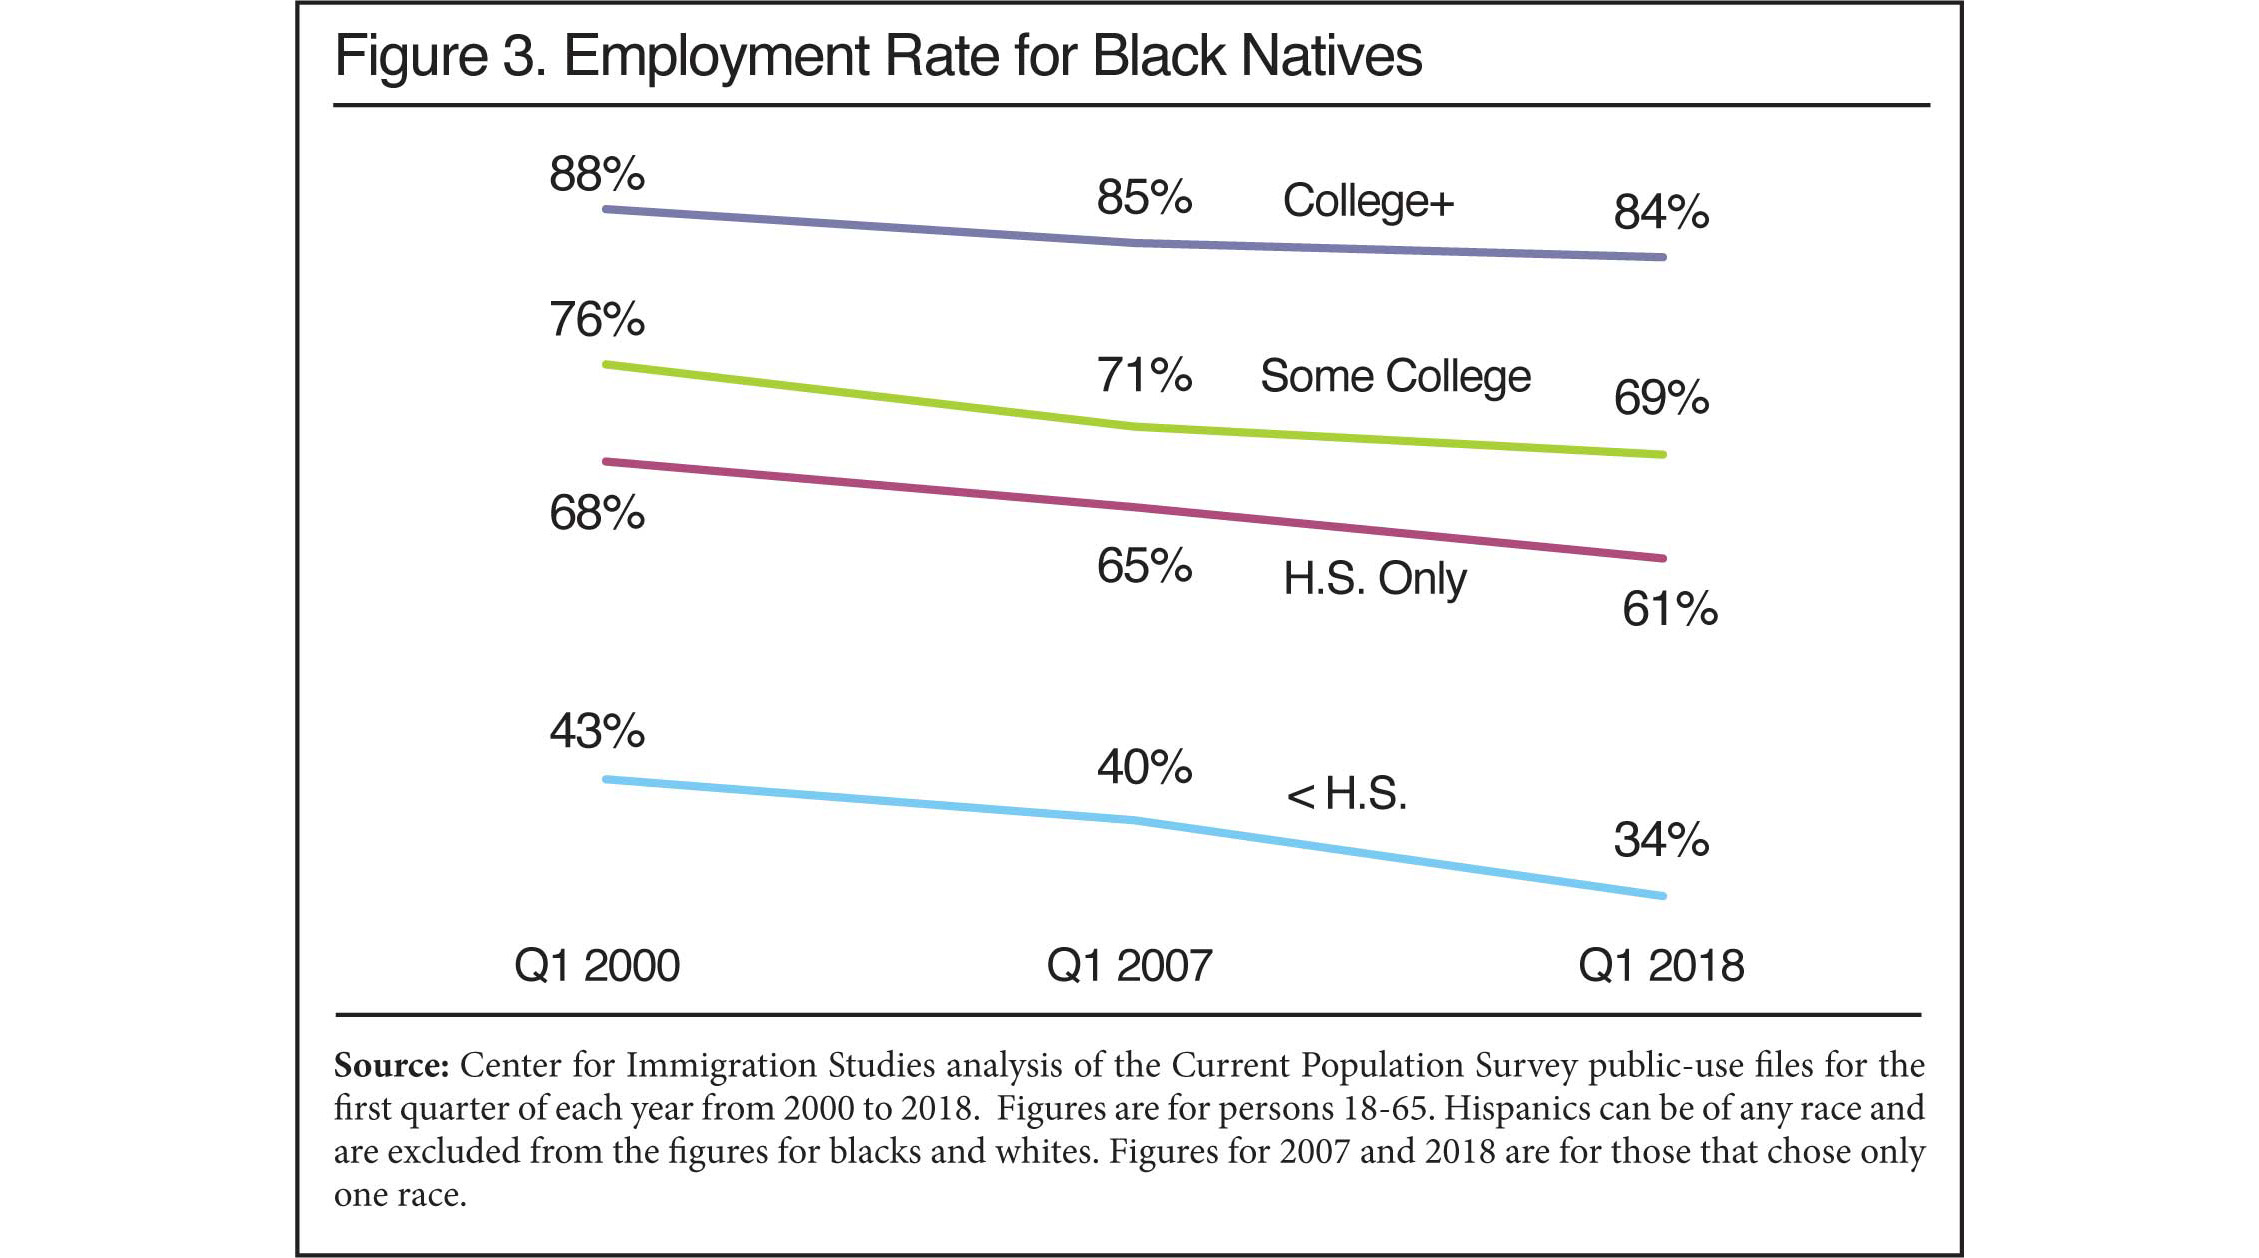 Graph: Employment Rate for Black Natives, 2000 to 2018